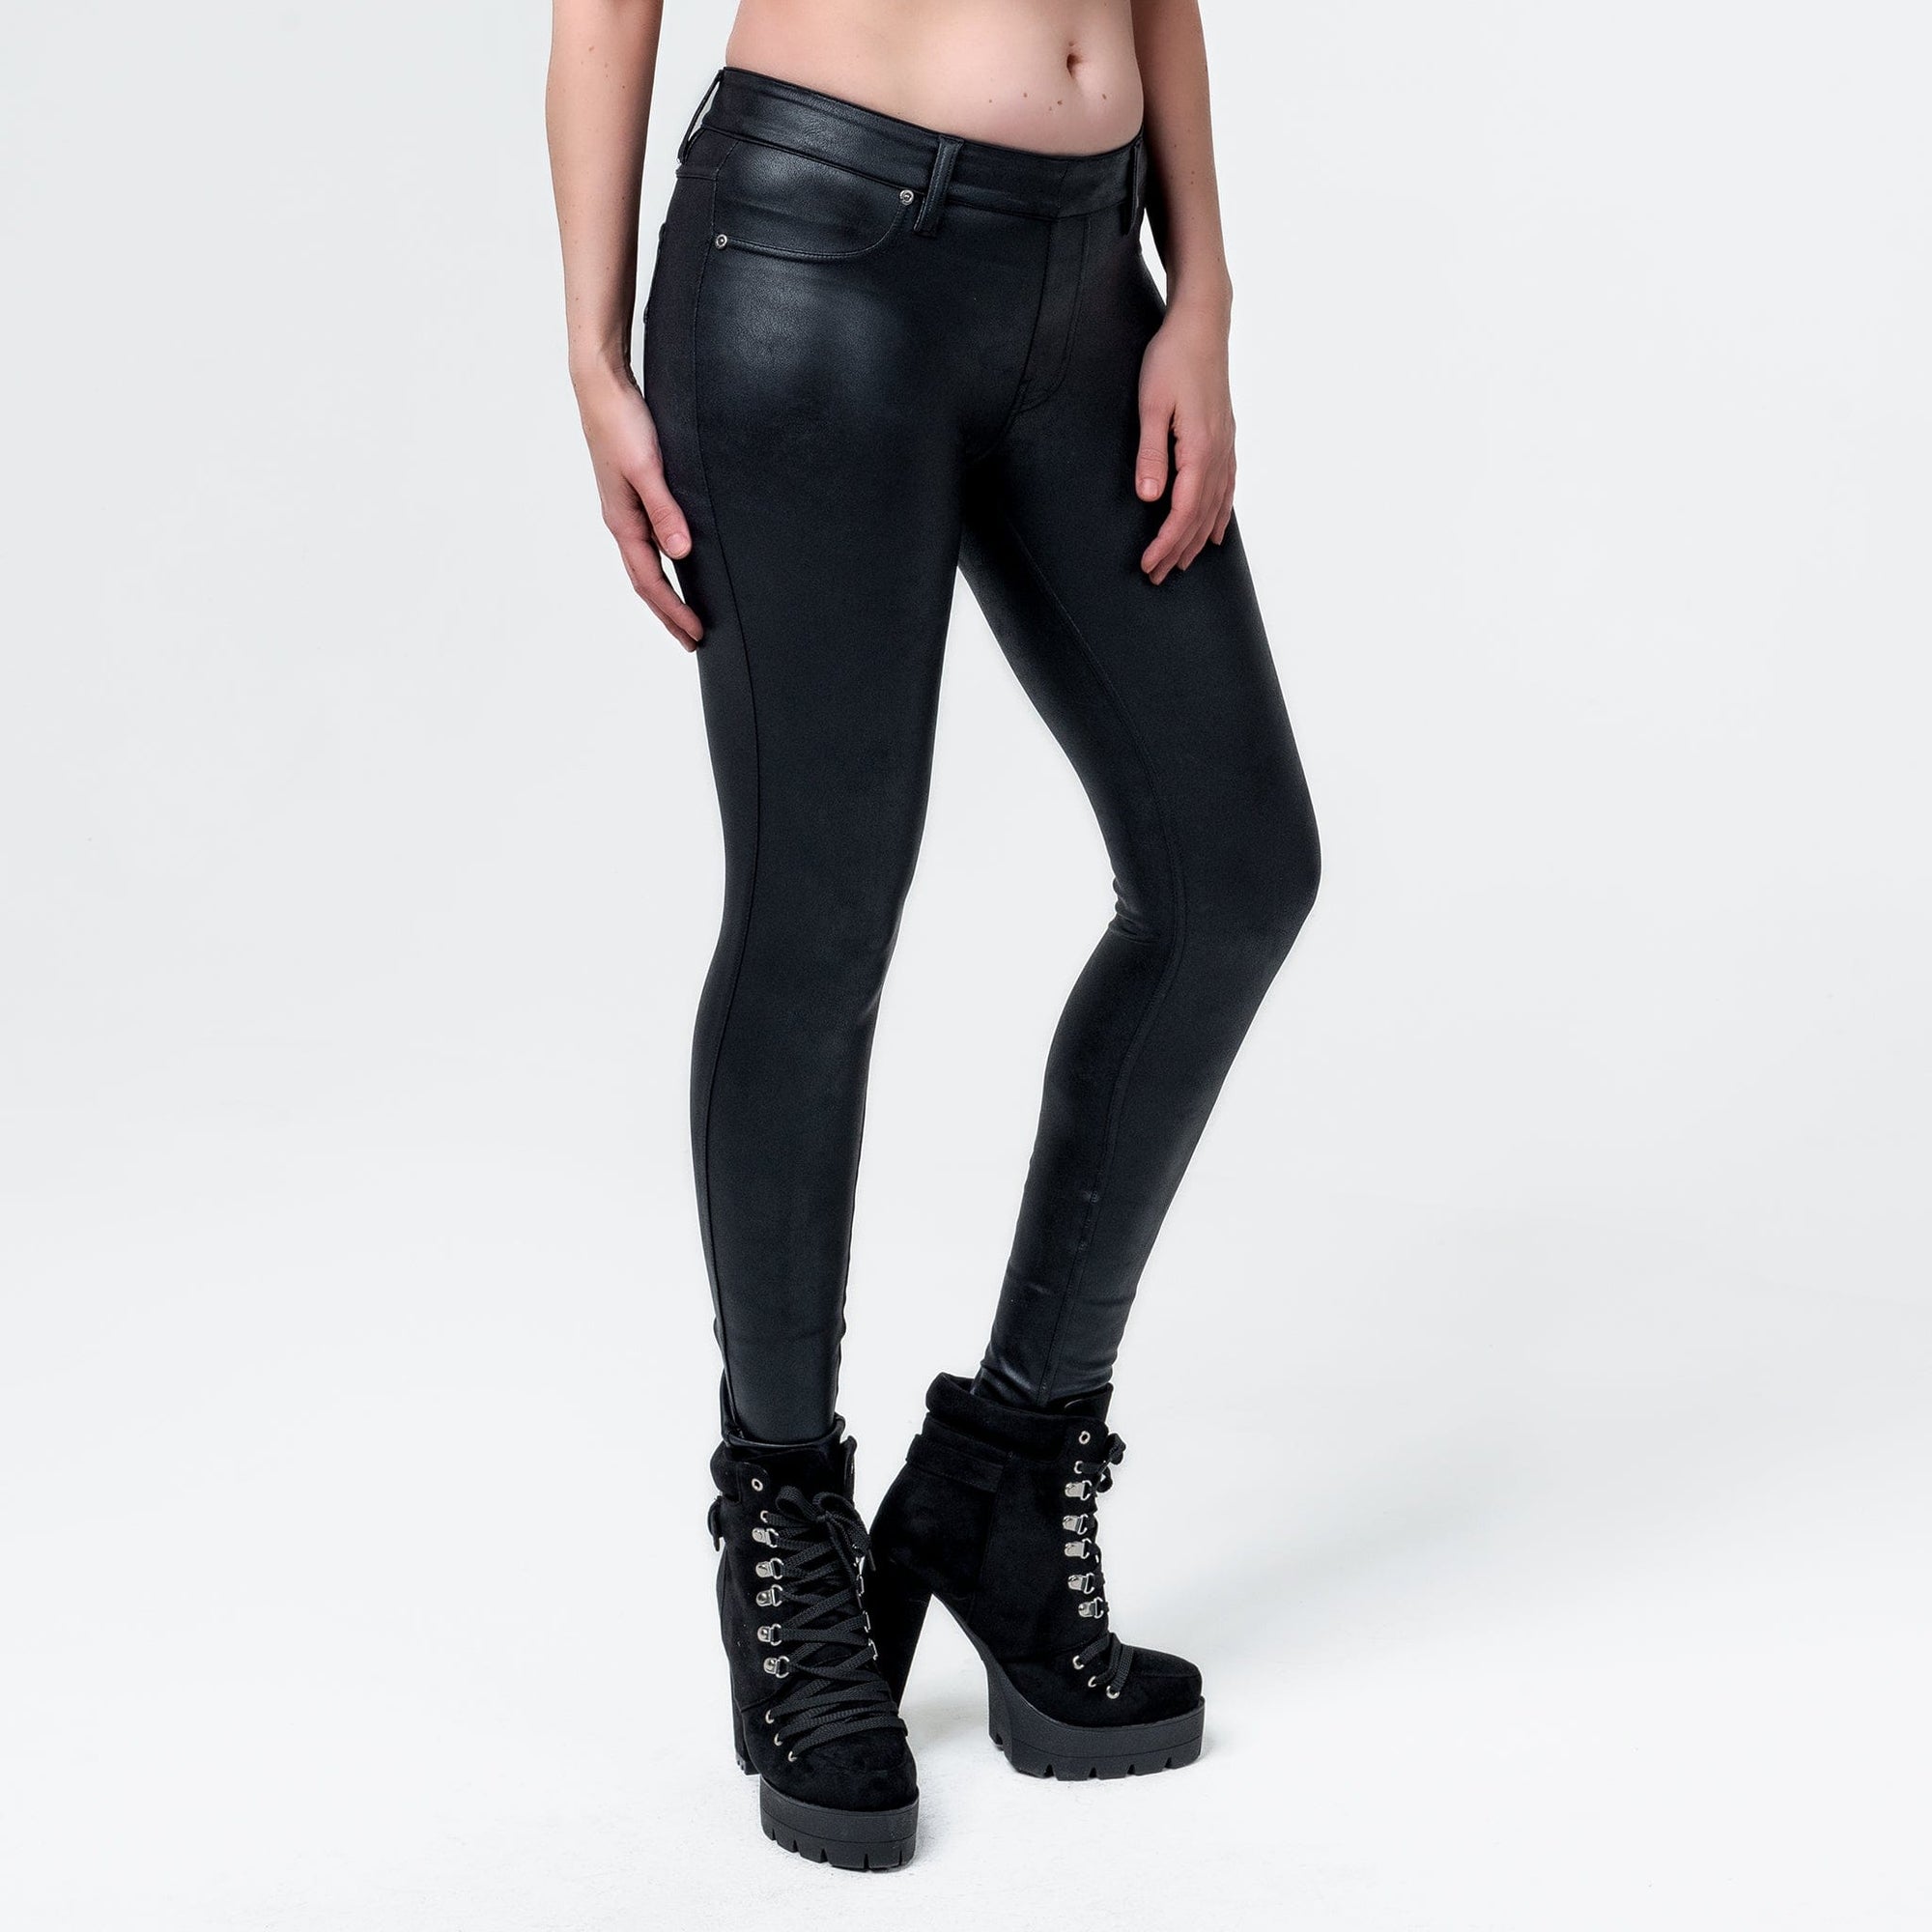 Sirens Collection Pants Fearless Skinny Cut Pants